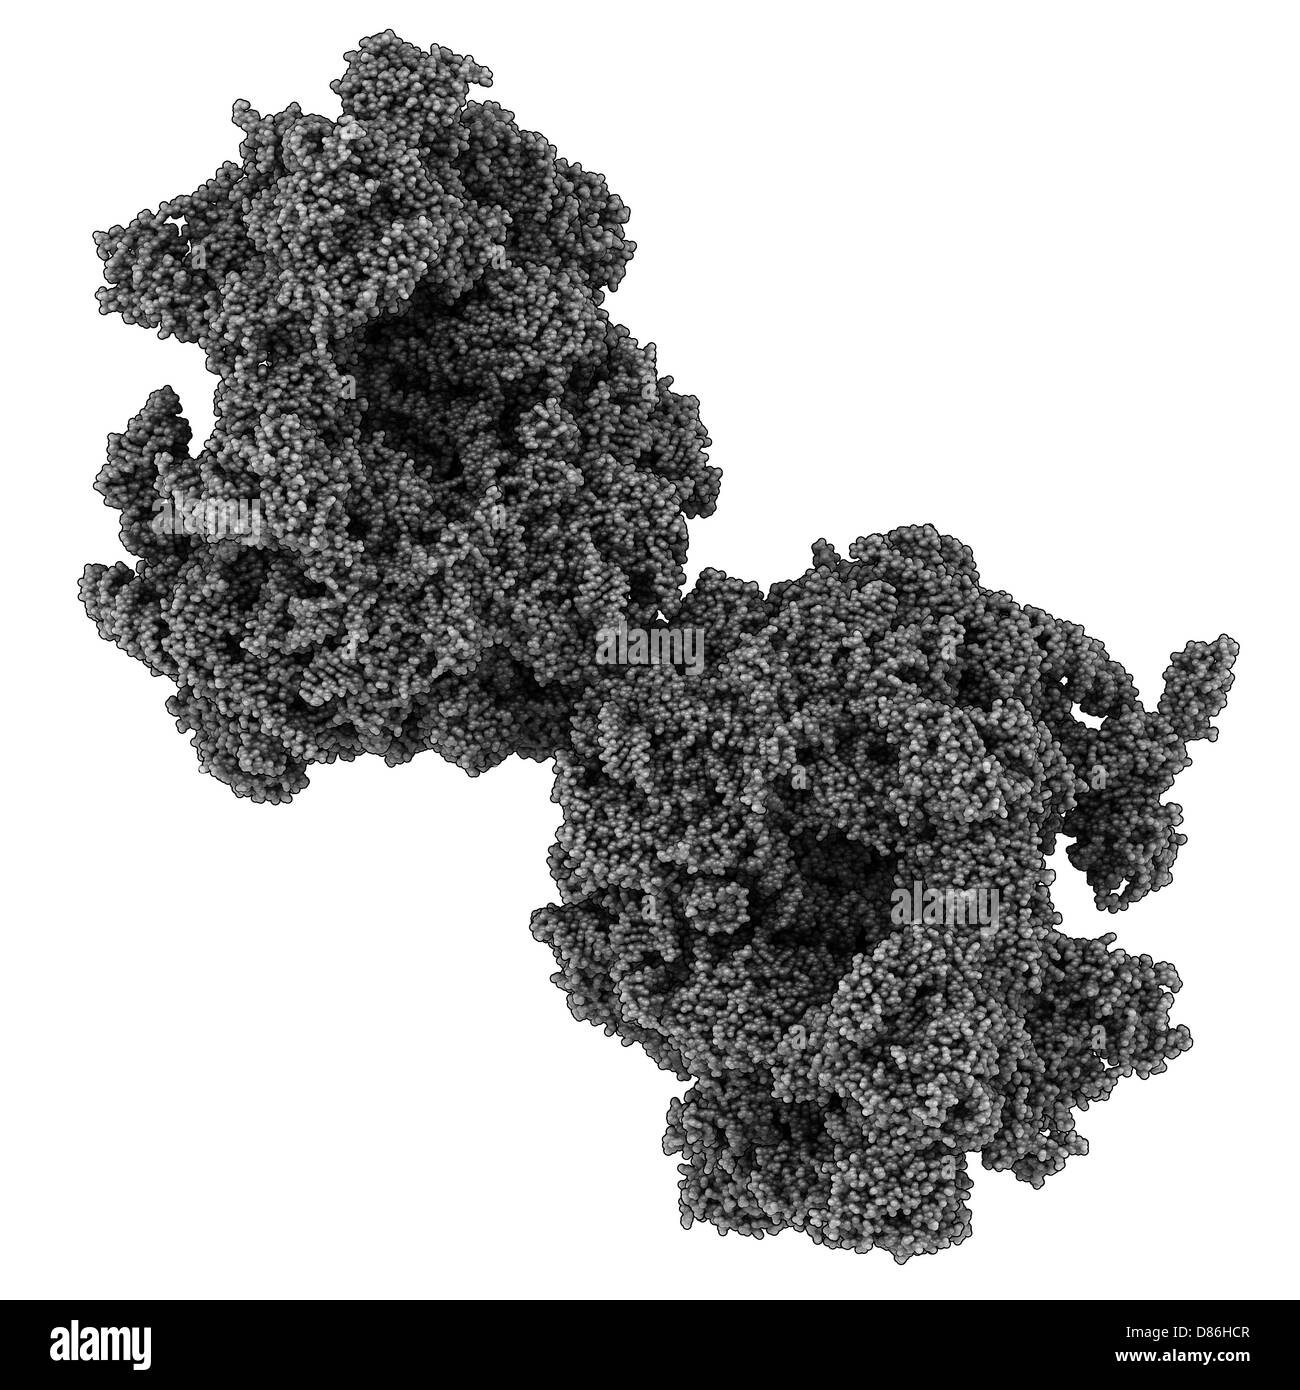 Eukaryotic ribosome (80S, from Baker's yeast). The ribosome is composed of proteins and RNA. Stock Photo